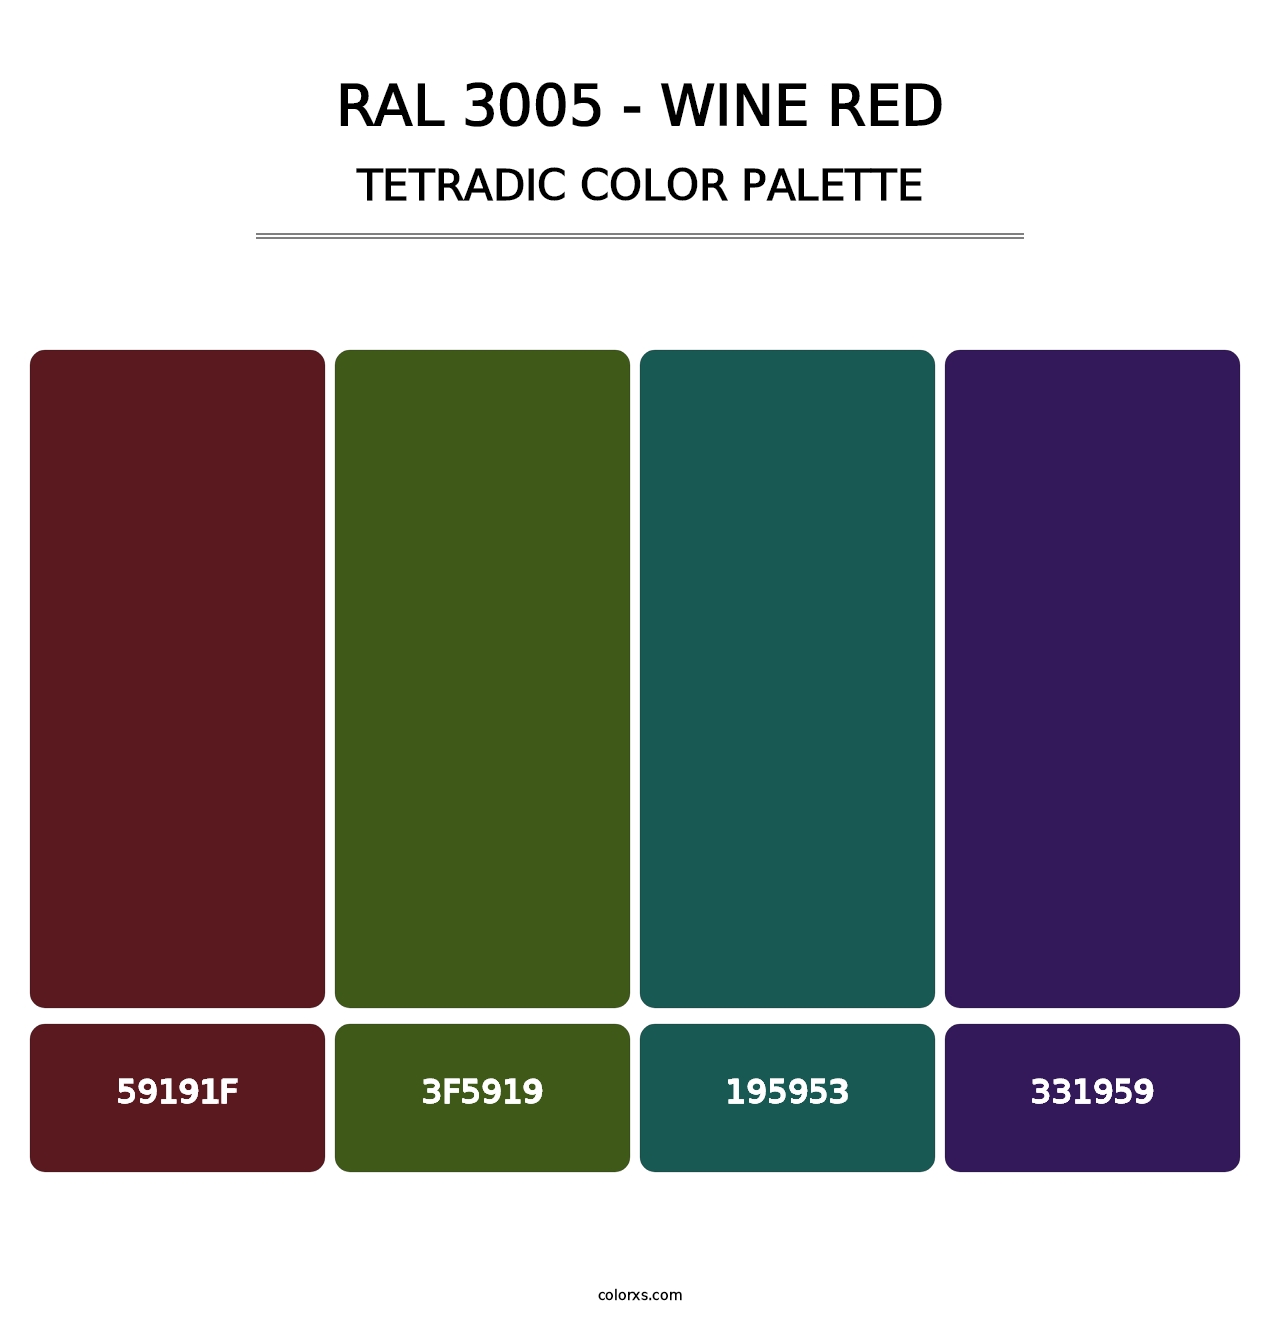 RAL 3005 - Wine Red - Tetradic Color Palette